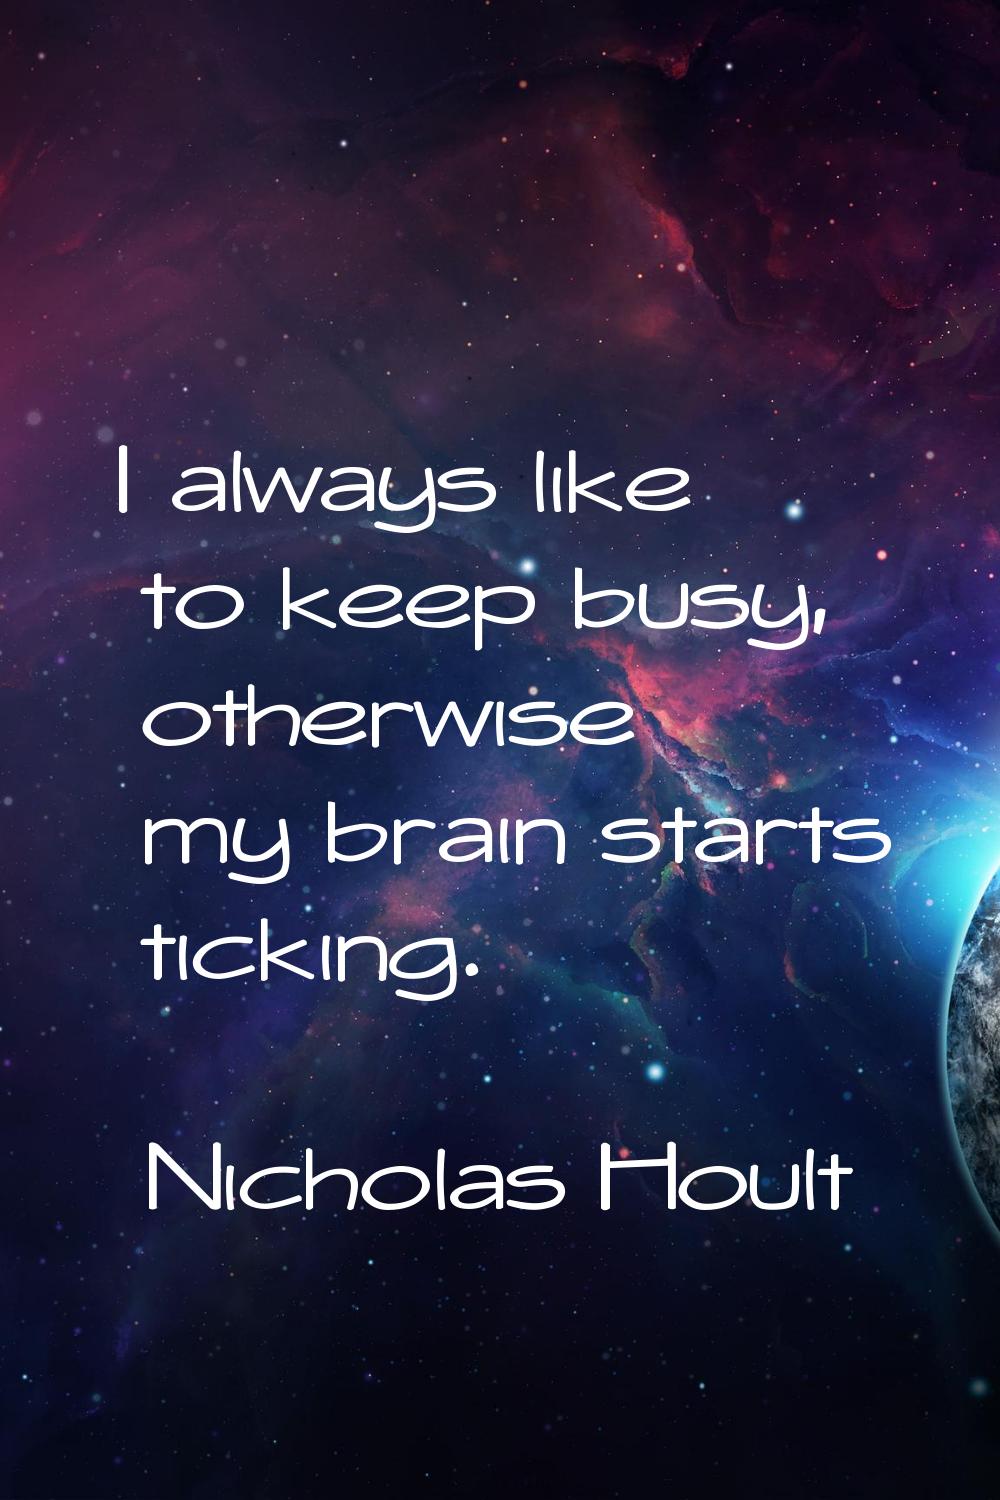 I always like to keep busy, otherwise my brain starts ticking.